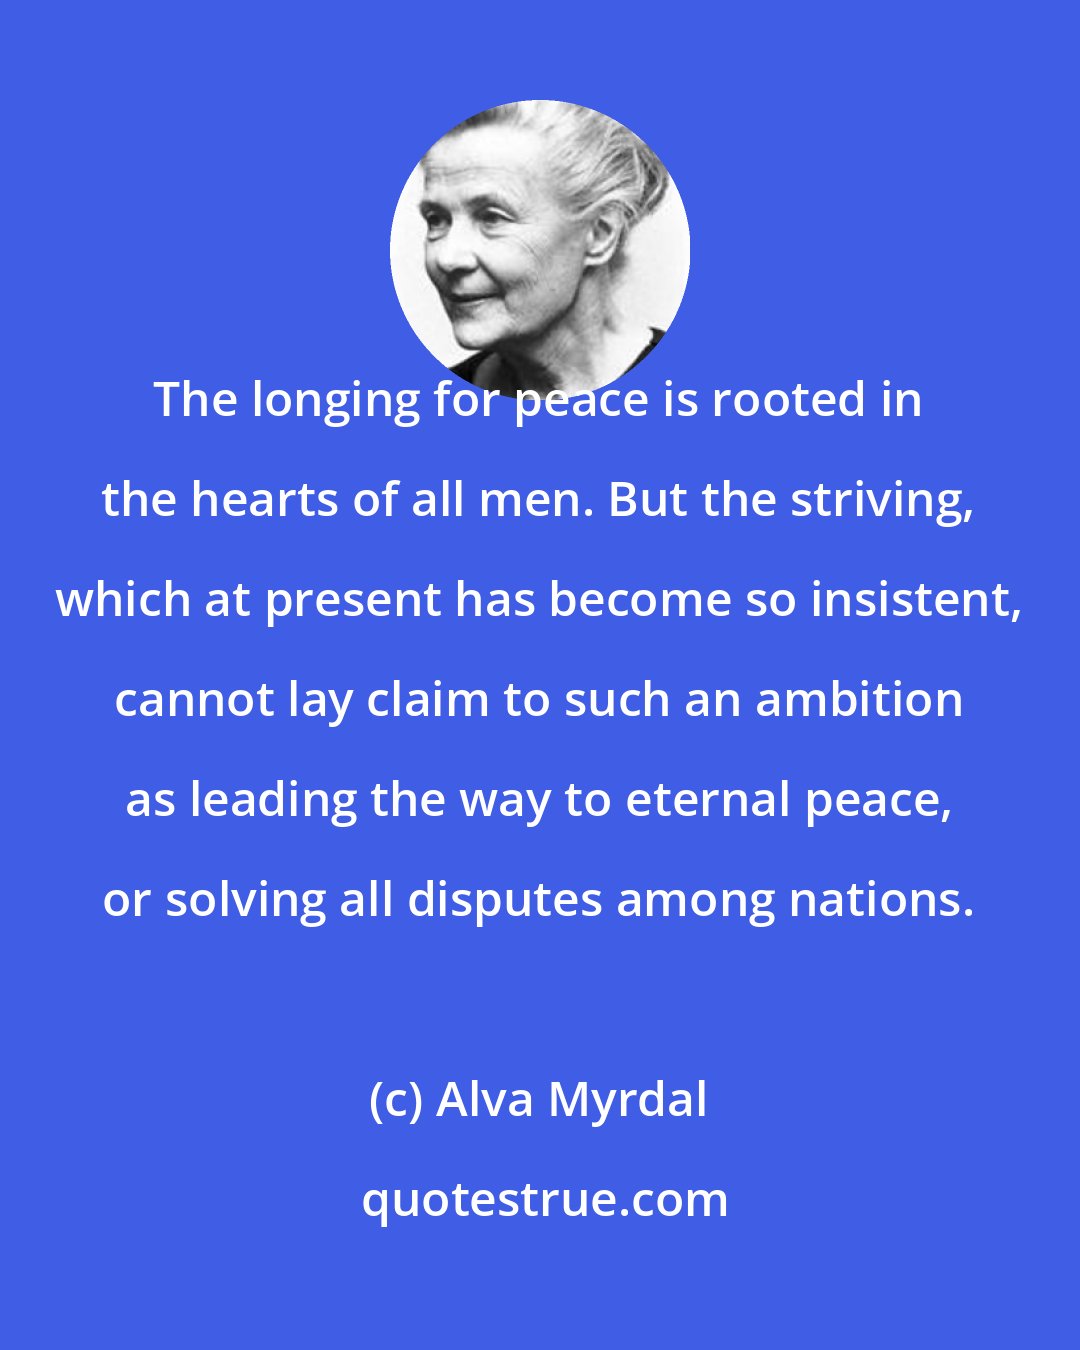 Alva Myrdal: The longing for peace is rooted in the hearts of all men. But the striving, which at present has become so insistent, cannot lay claim to such an ambition as leading the way to eternal peace, or solving all disputes among nations.